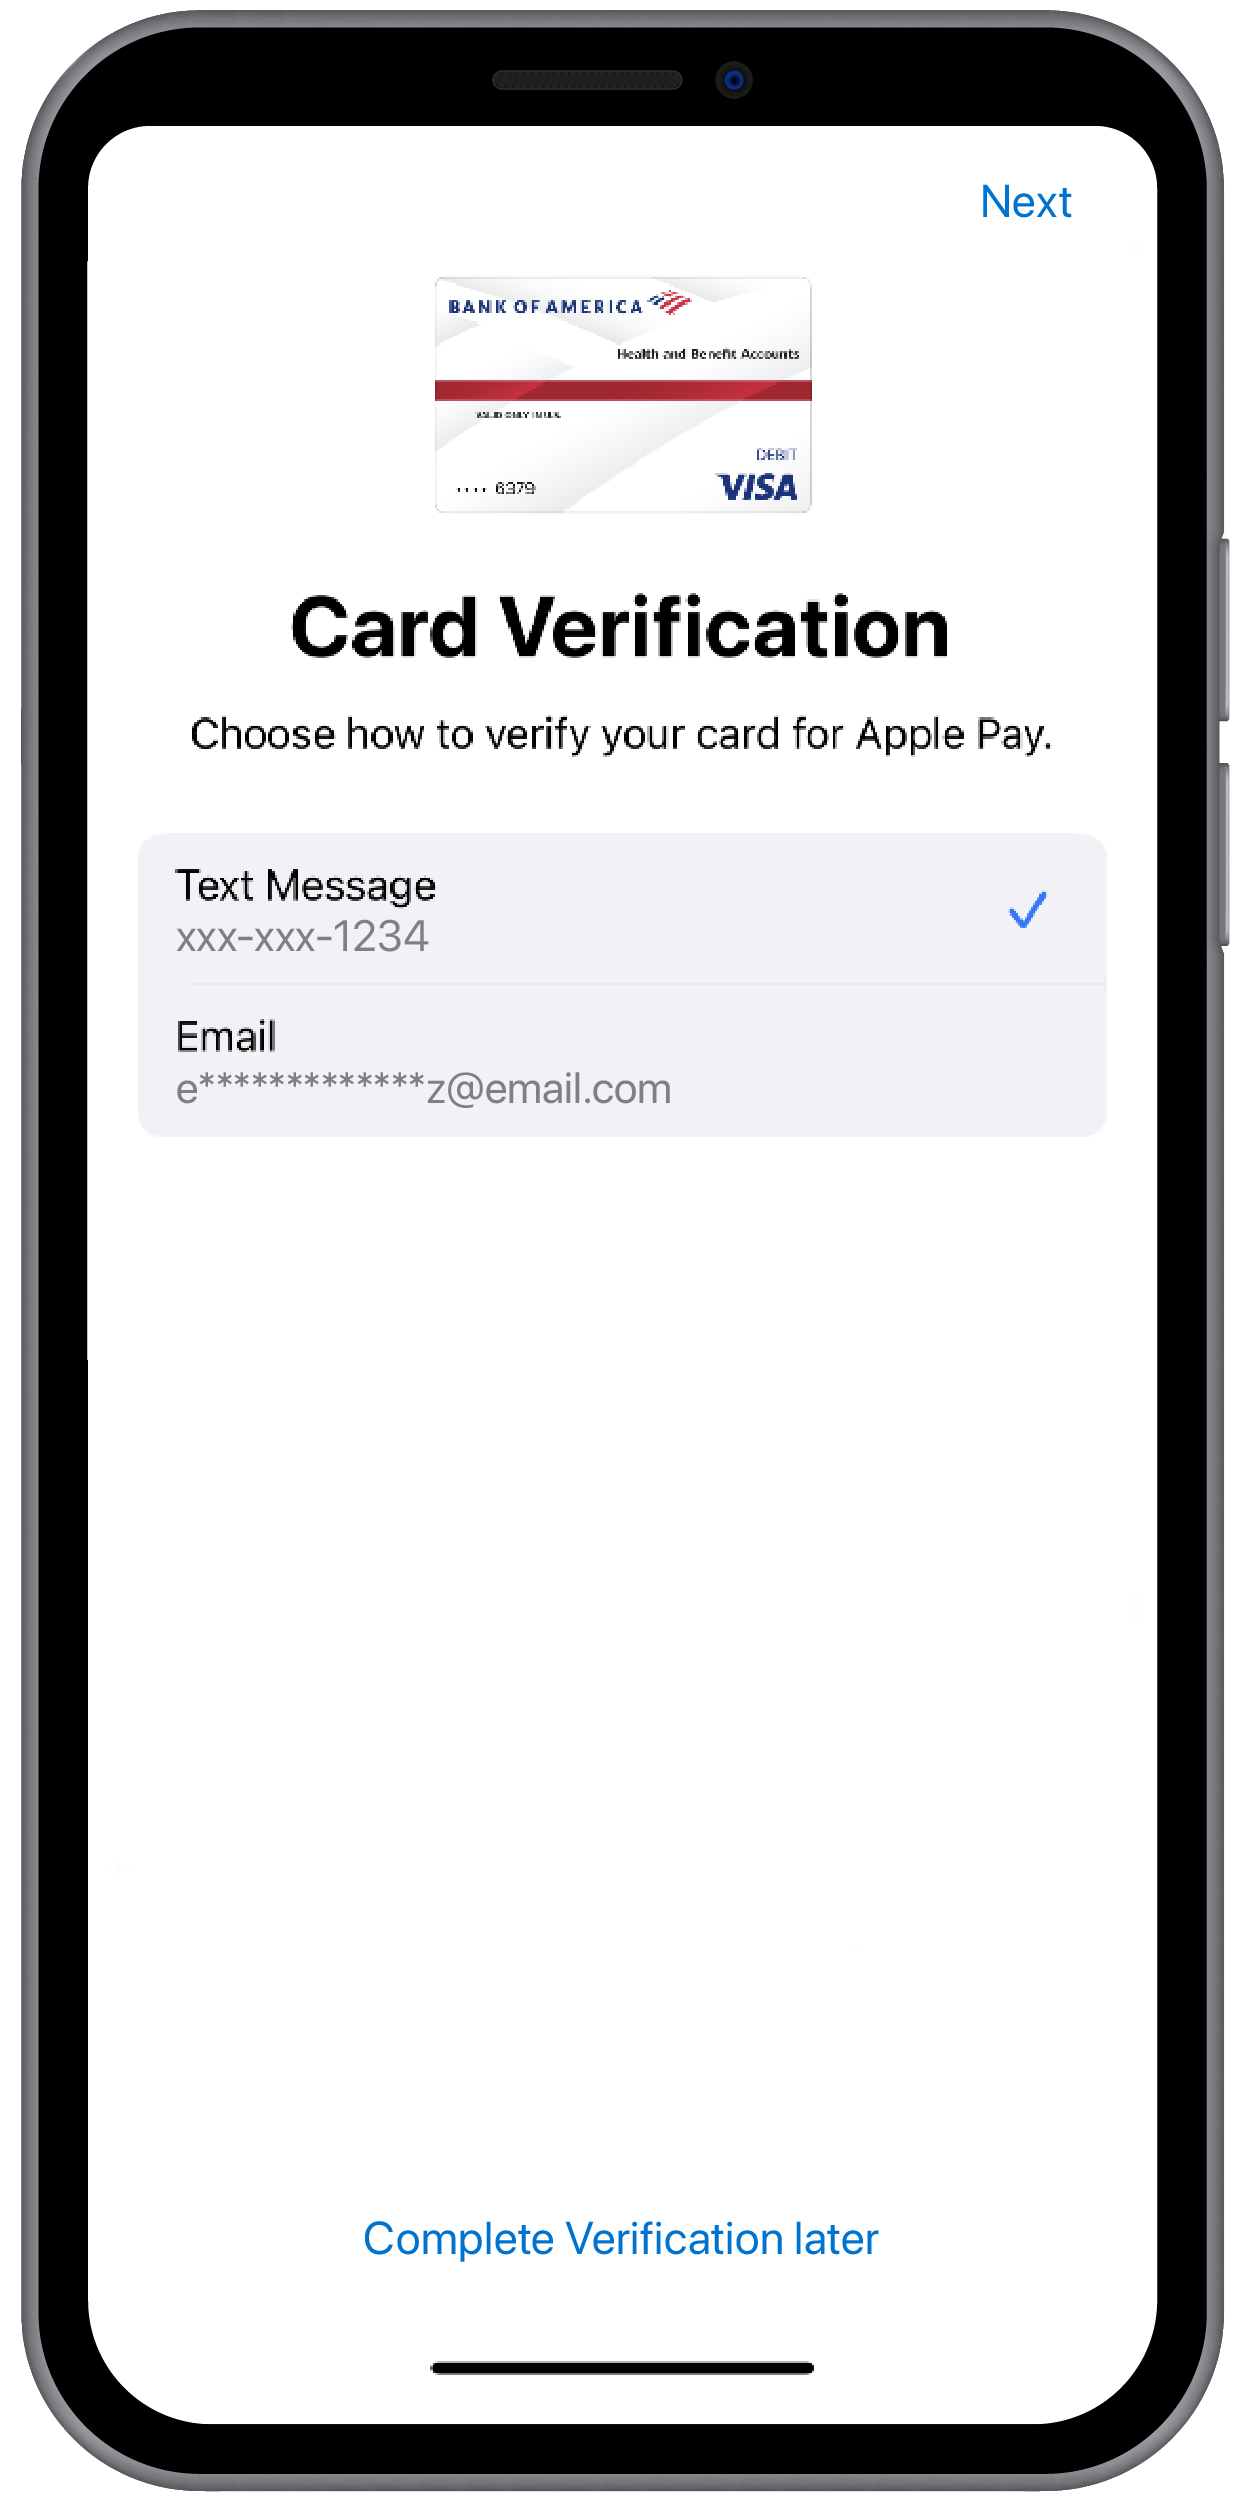 Apple’s “Card Verification” screen showing the verification options to add the Bank of America Health and Benefit Visa® debit card to the wallet. Options for Text Message verification with a phone number and Email verification with an email address are shown, with Text Message selected. An option to “Complete Verification later” appears at the bottom of the screen.